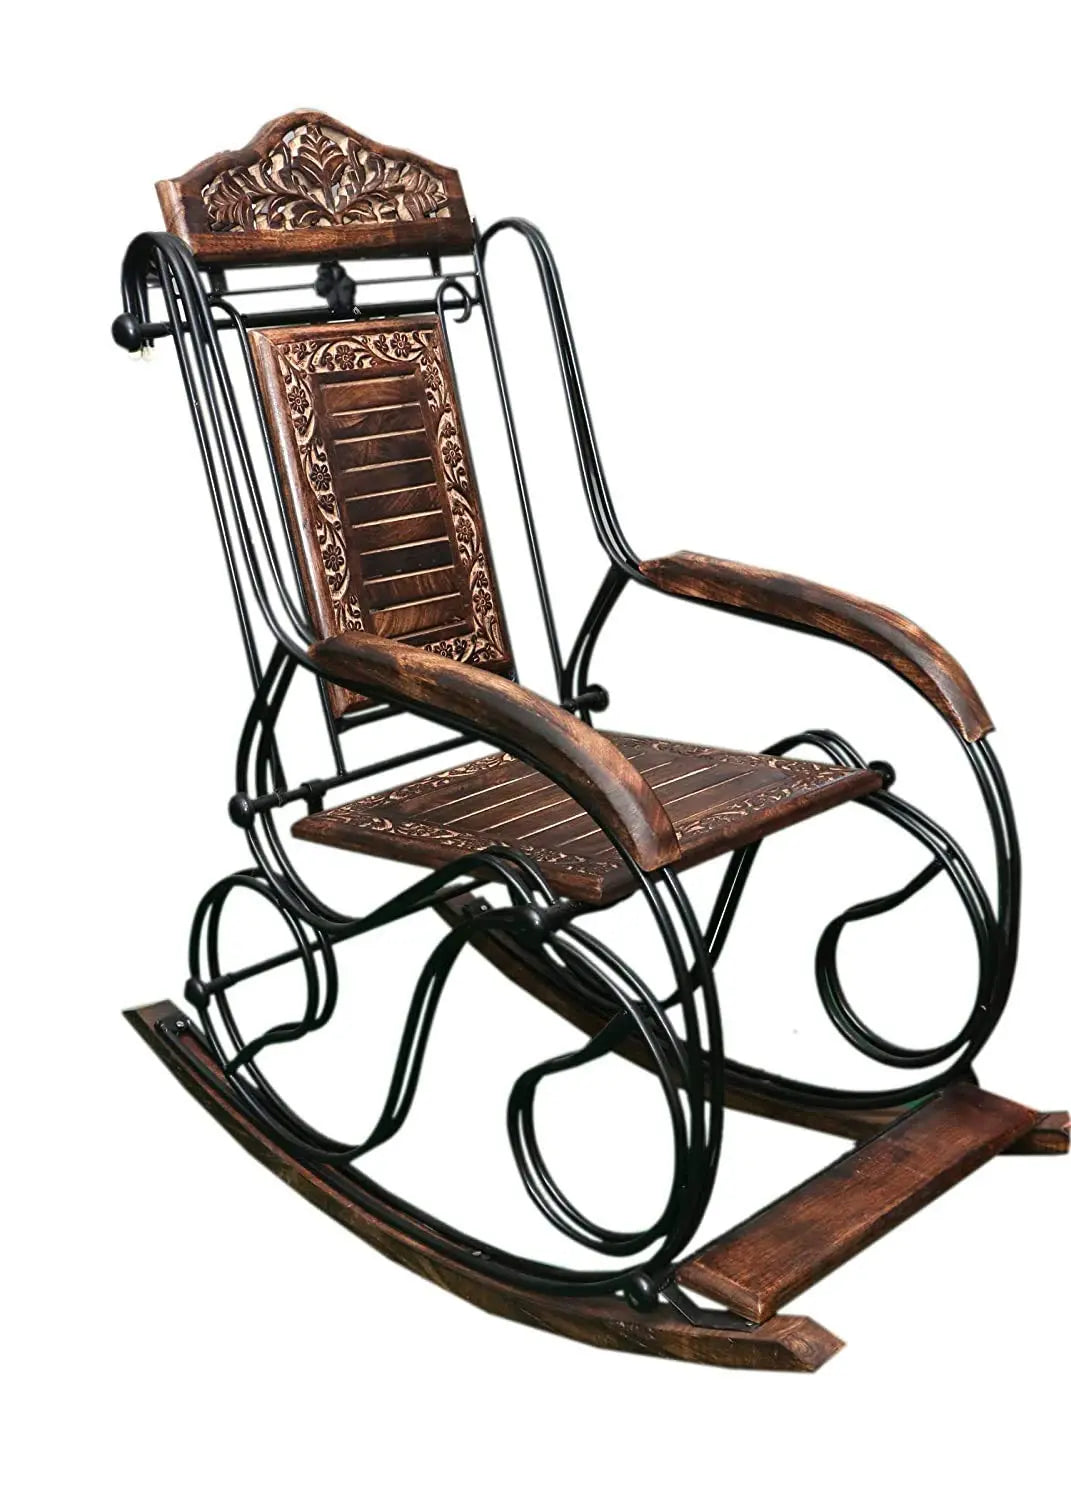 Rocking chair Zing- Beautiful Wooden & Iron Rocking Chair for Grand Parents | Patio Carved Vintage Outdoor Indoor Iron Rocking Chair for Garden Furneez